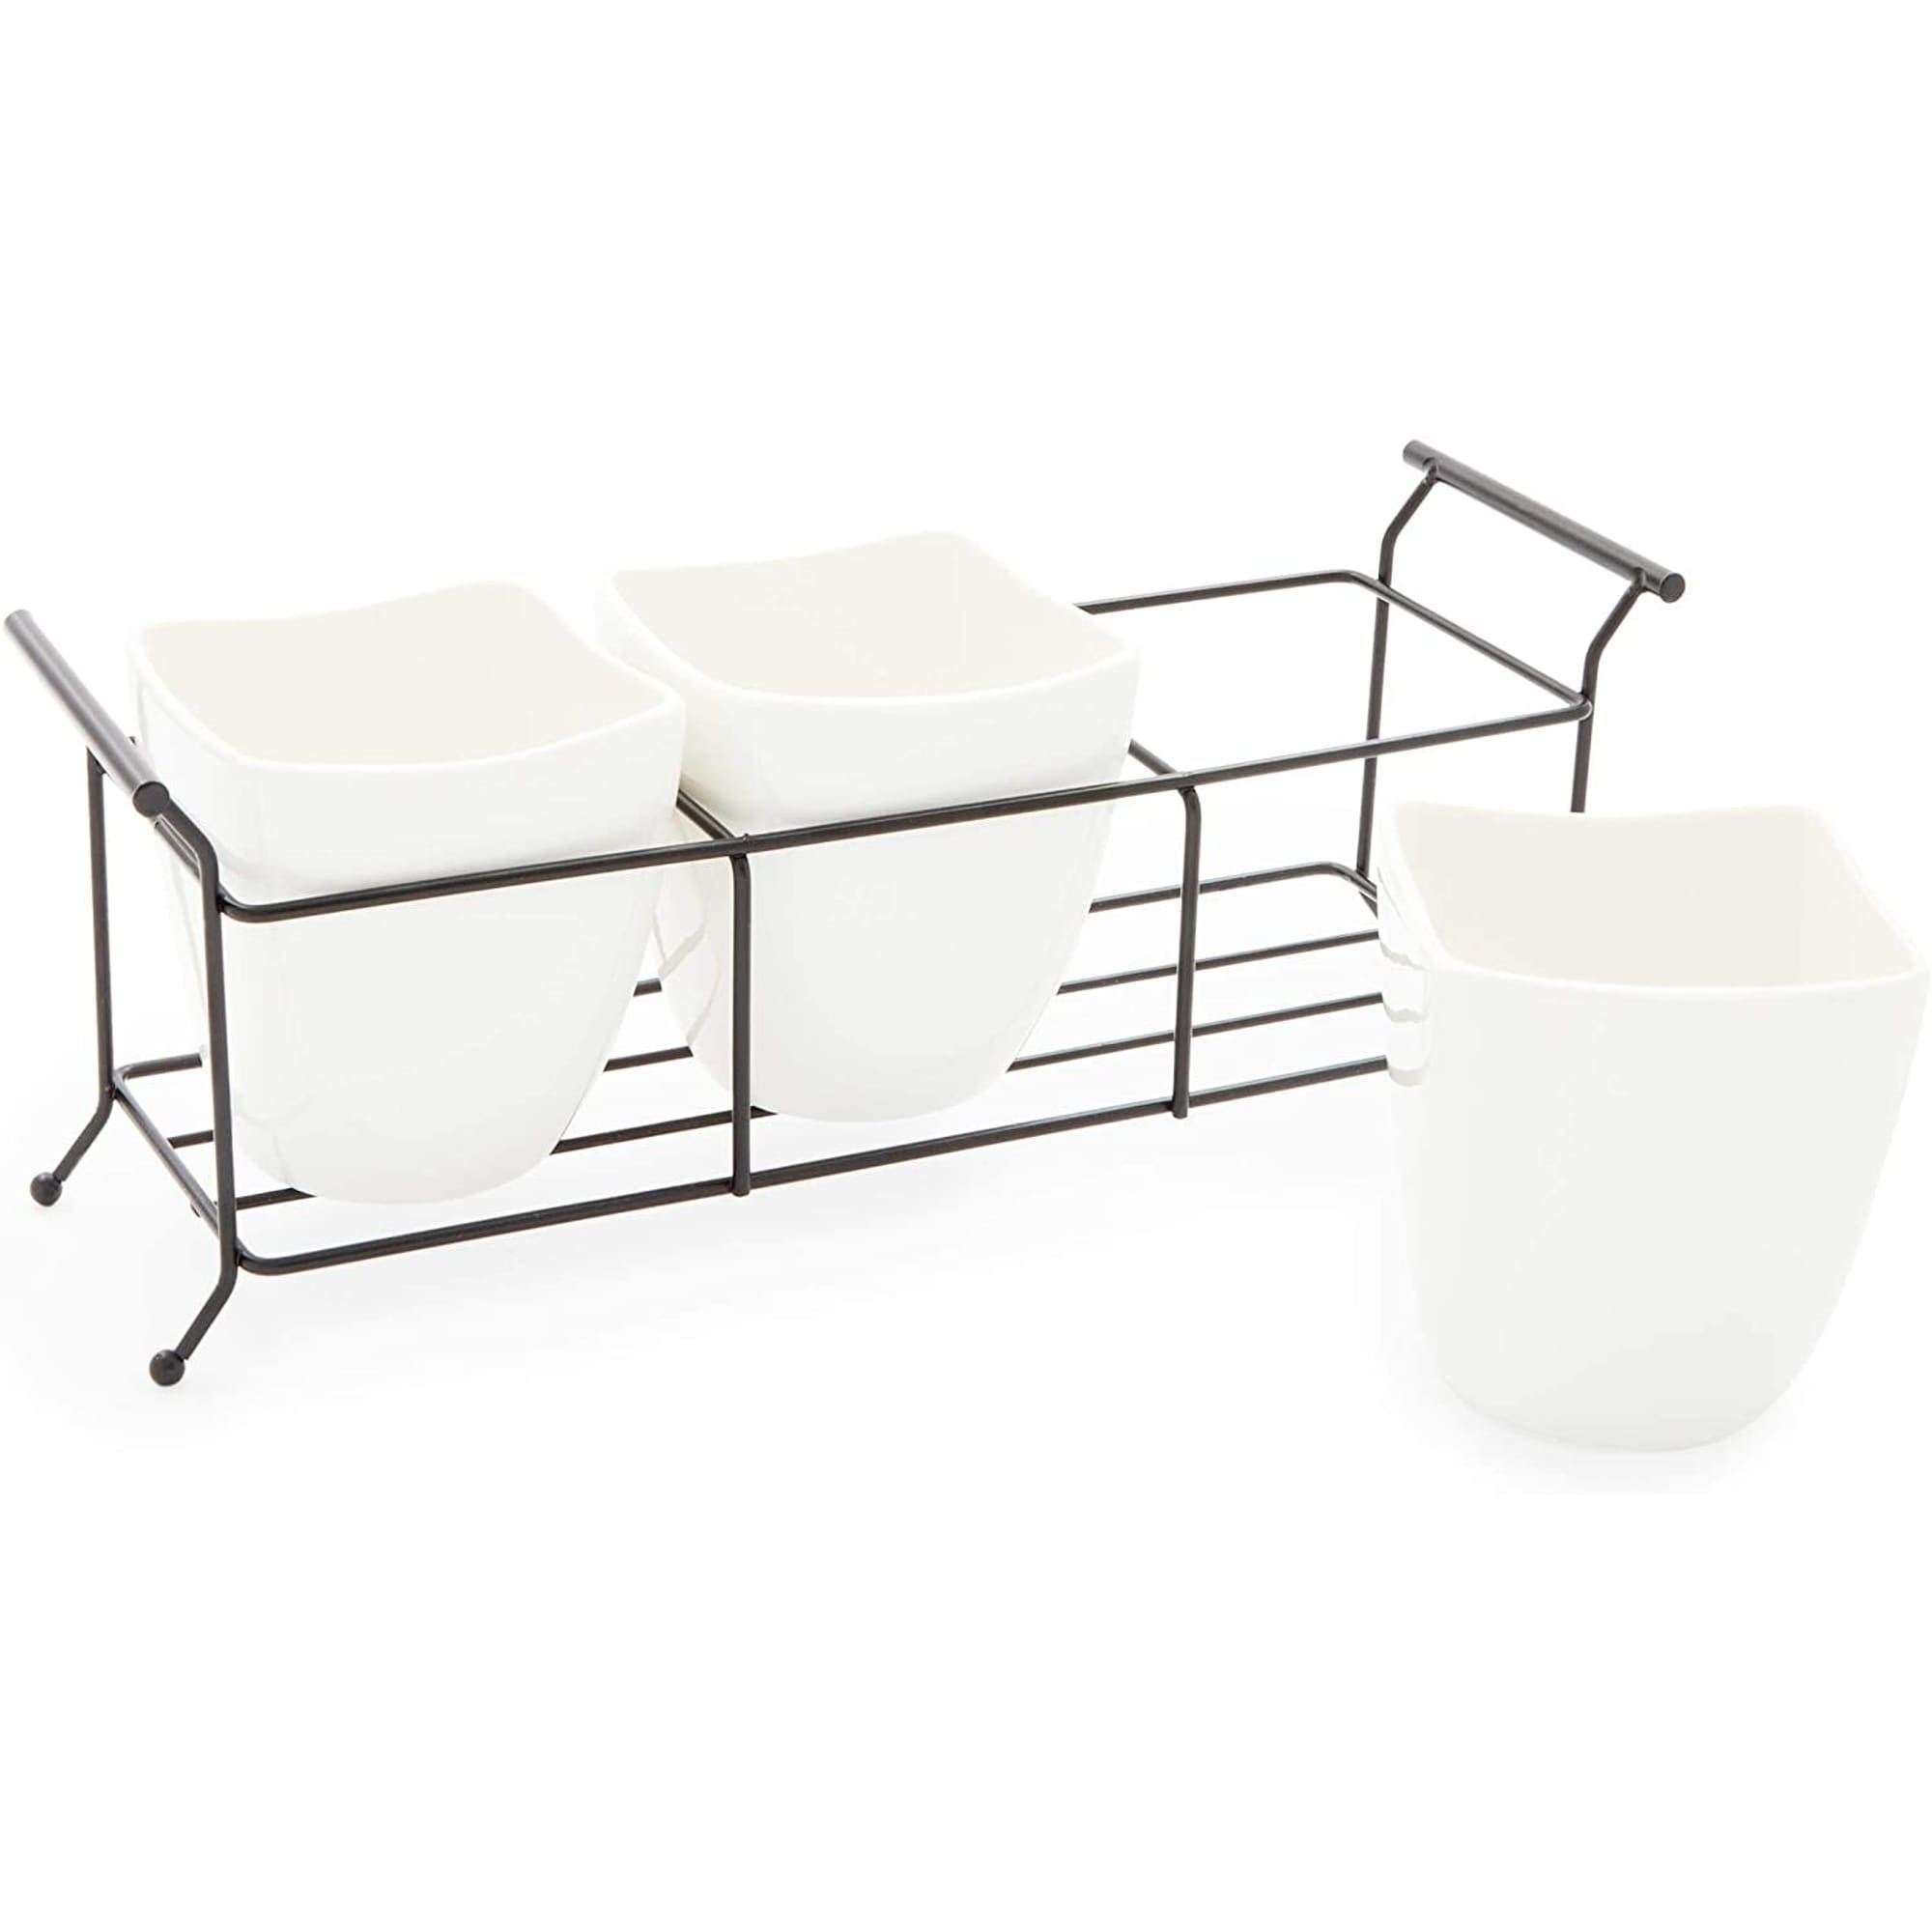 https://ak1.ostkcdn.com/images/products/is/images/direct/a876ee4cfb050dd89e1dc55964ec5b865dbc7fe4/White-Ceramic-Utensil-Holder%2C-Flatware-Caddy-with-Metal-Stand-%2813-x-4-x-5-In%29.jpg